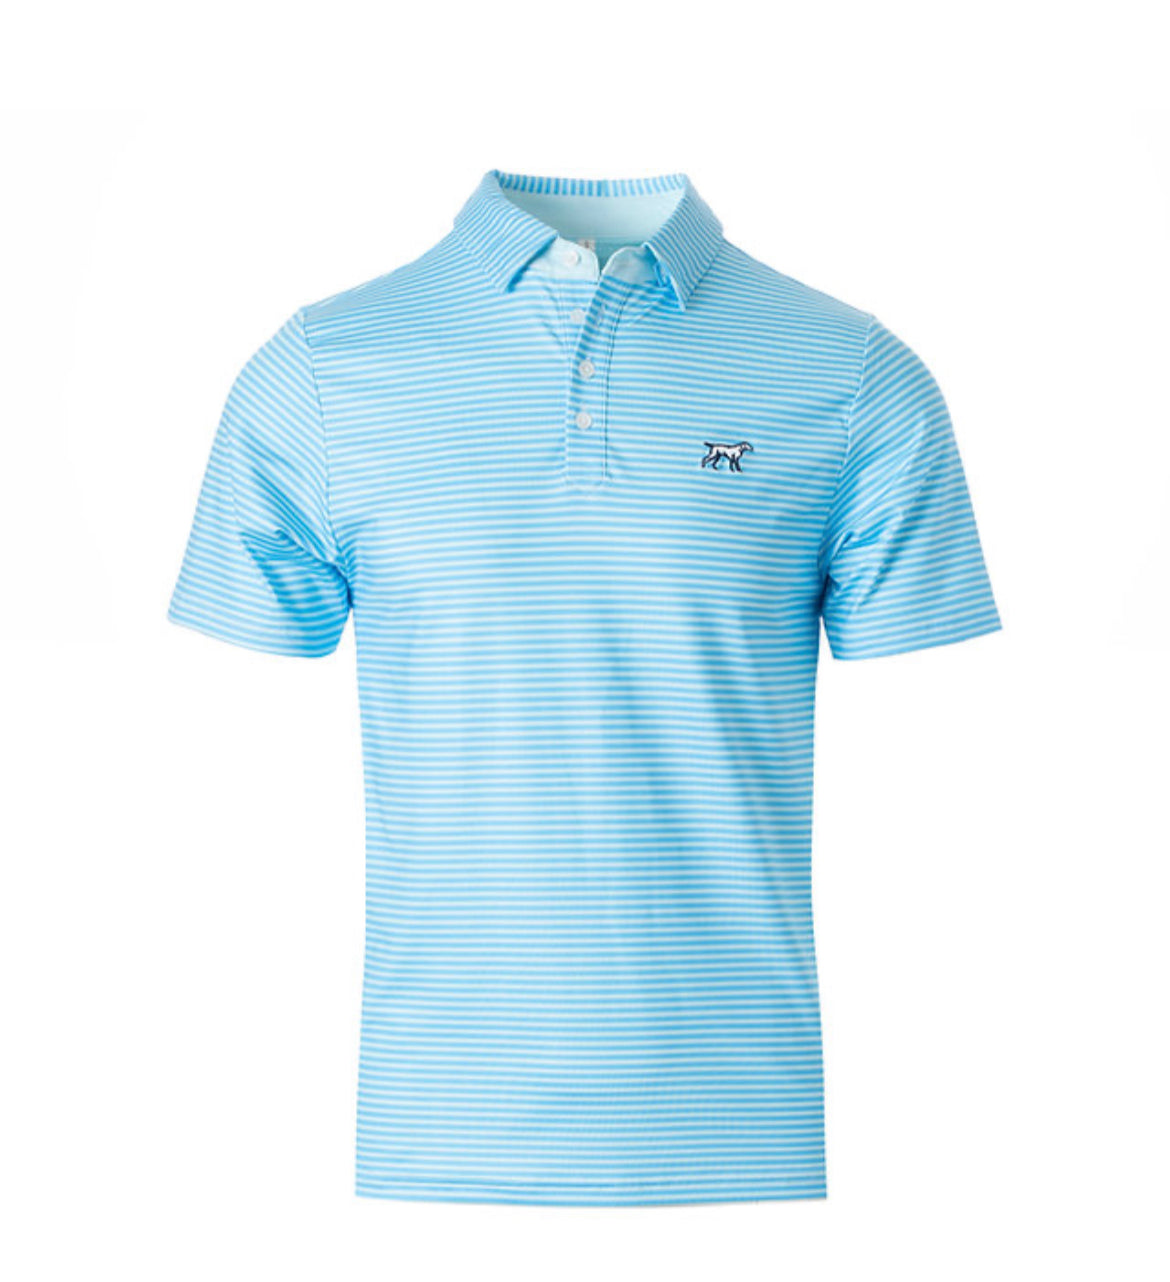 Signature Performance Polo- BABY BLUE